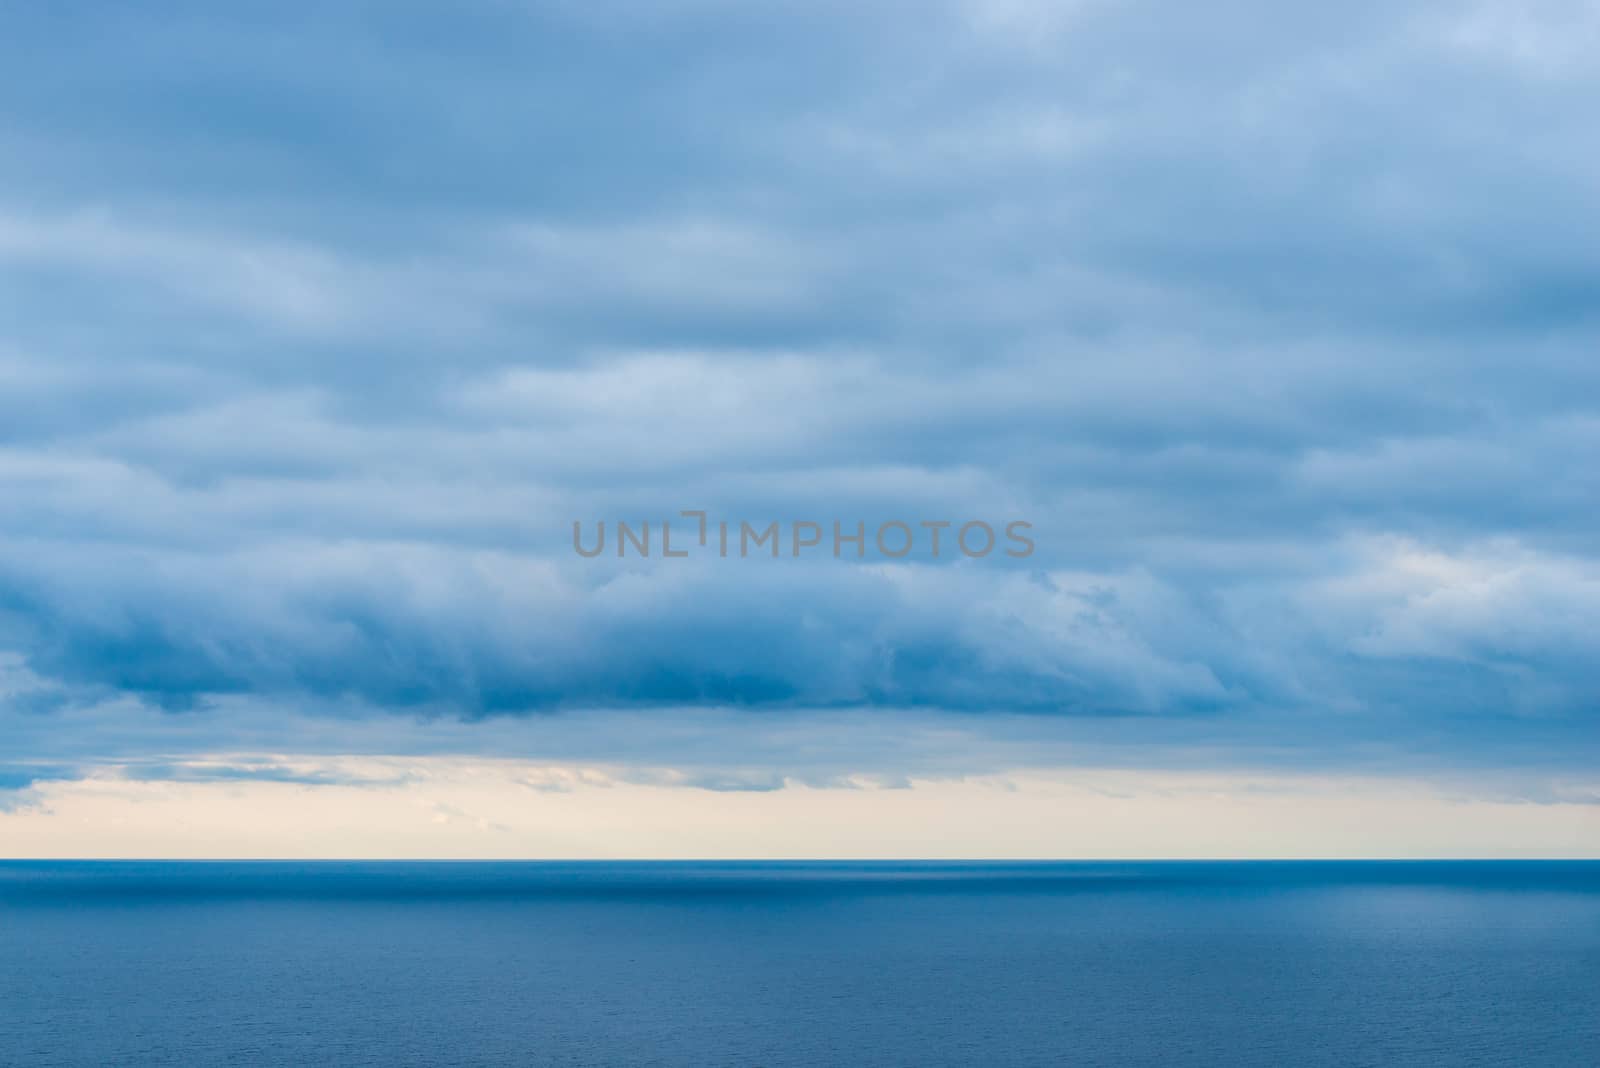 Landscape of the sea, view of the horizon, heavy rain clouds over the water